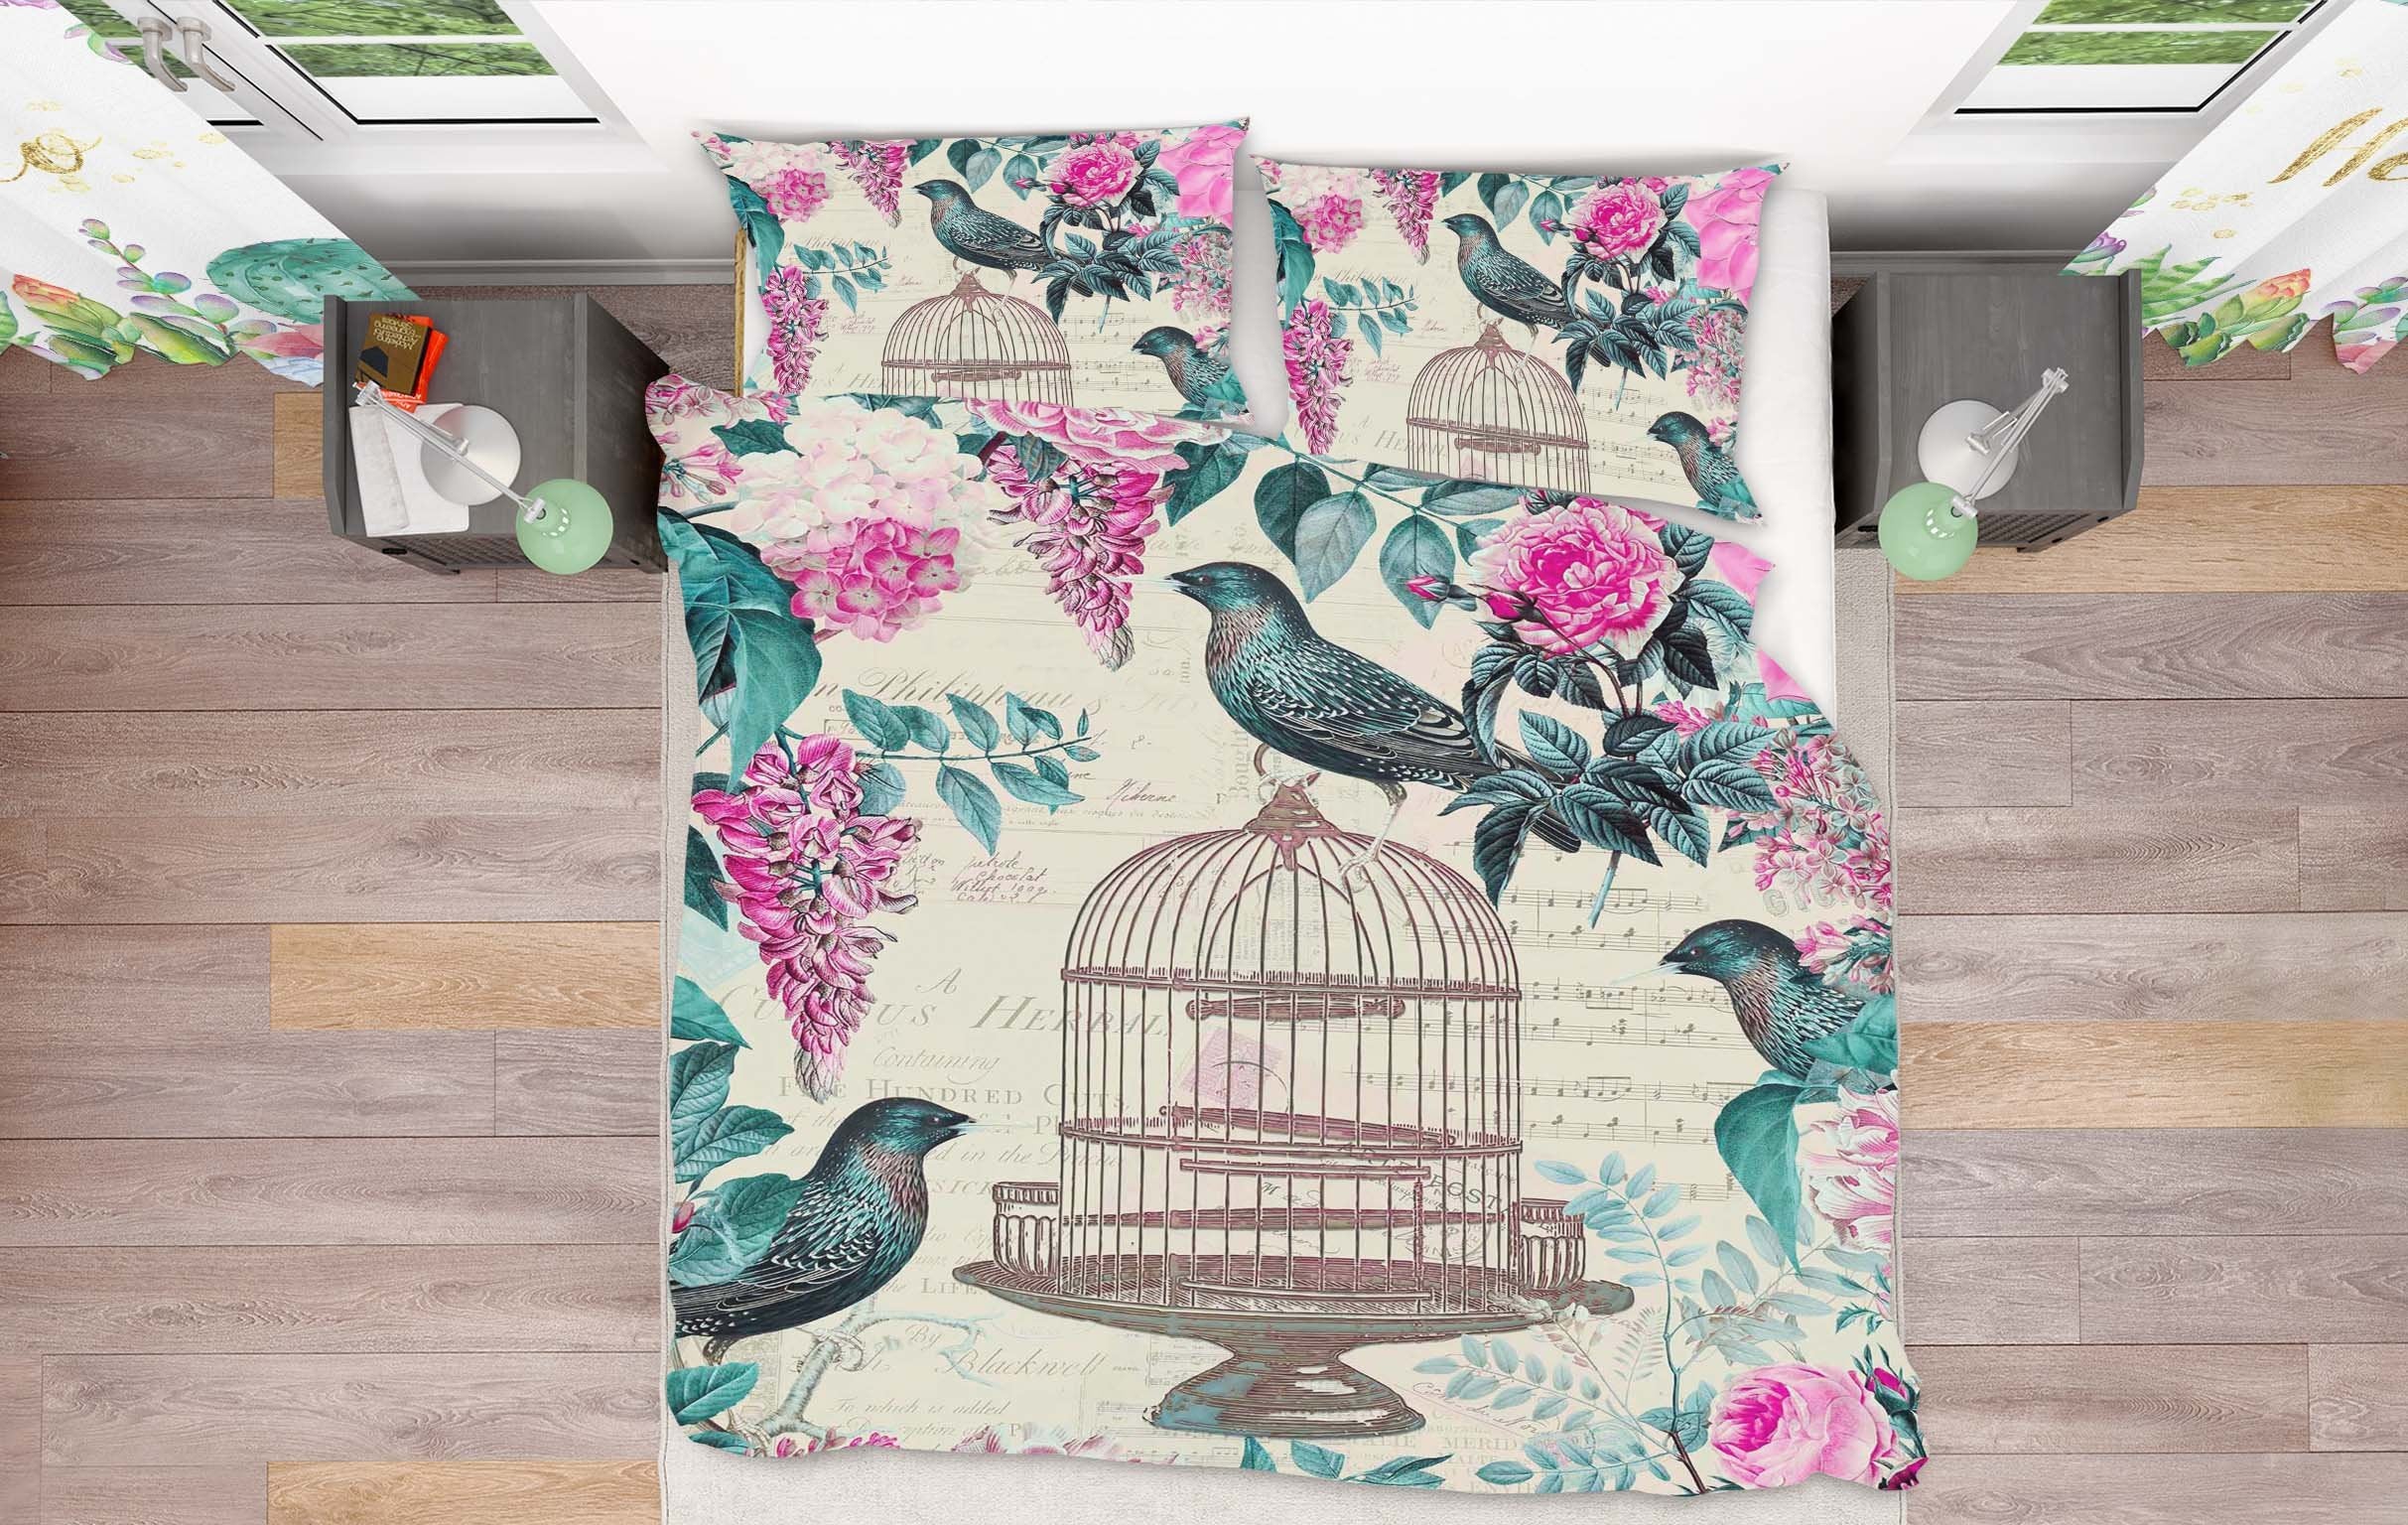 3D Bird Cage 2103 Andrea haase Bedding Bed Pillowcases Quilt Quiet Covers AJ Creativity Home 